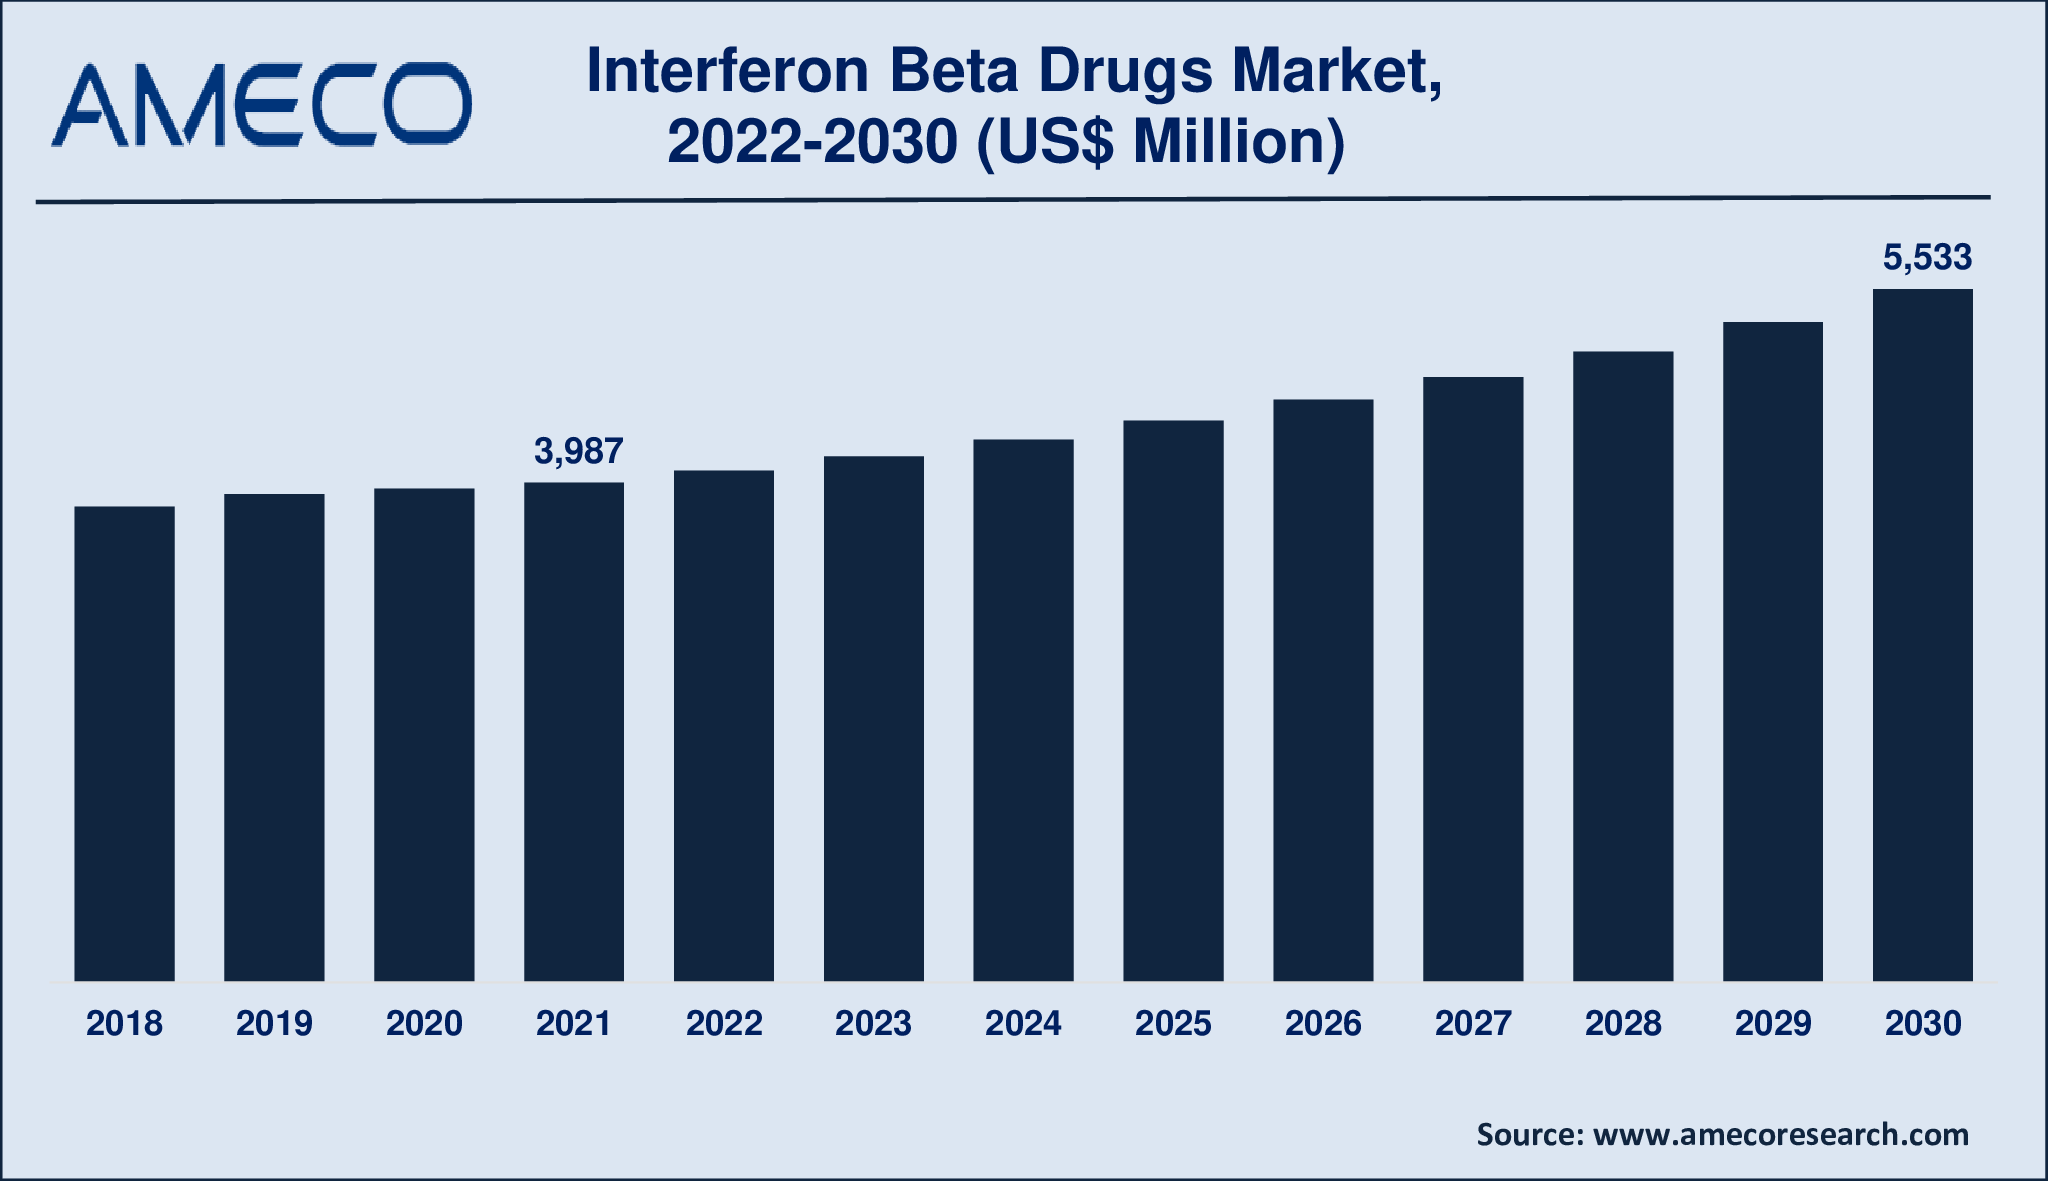 Interferon Beta Drugs Market Size, Share, Growth, Trends, and Forecast 2022-2030